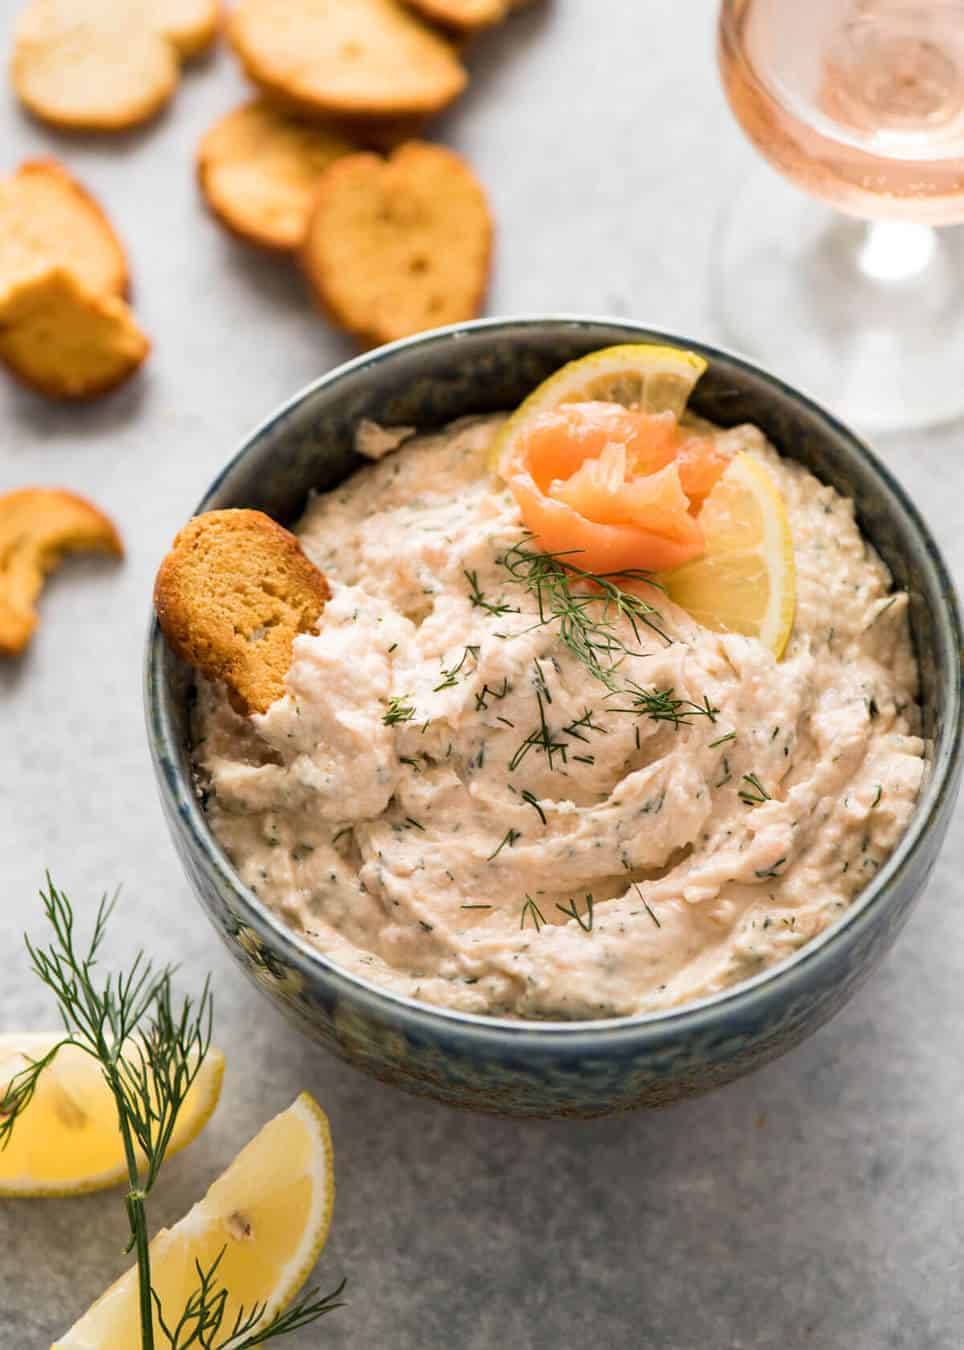 You'll never buy a Smoked Salmon Dip with flavour this good! www.recipetineats.com